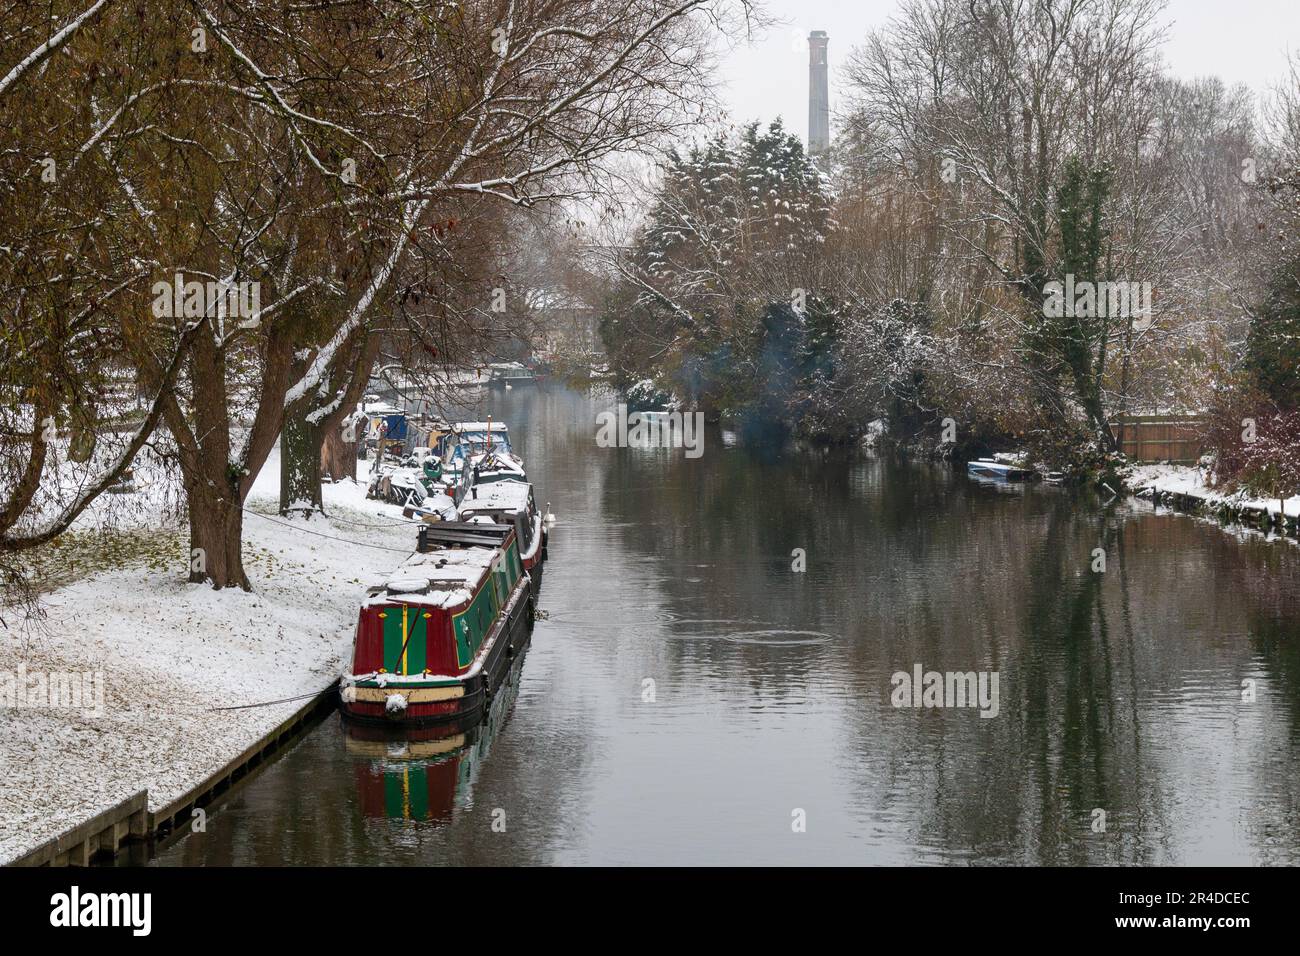 A narrowboat moored on the River Cam at Stourbridge Common, Cambridge, UK on a snowy, winter day. Stock Photo